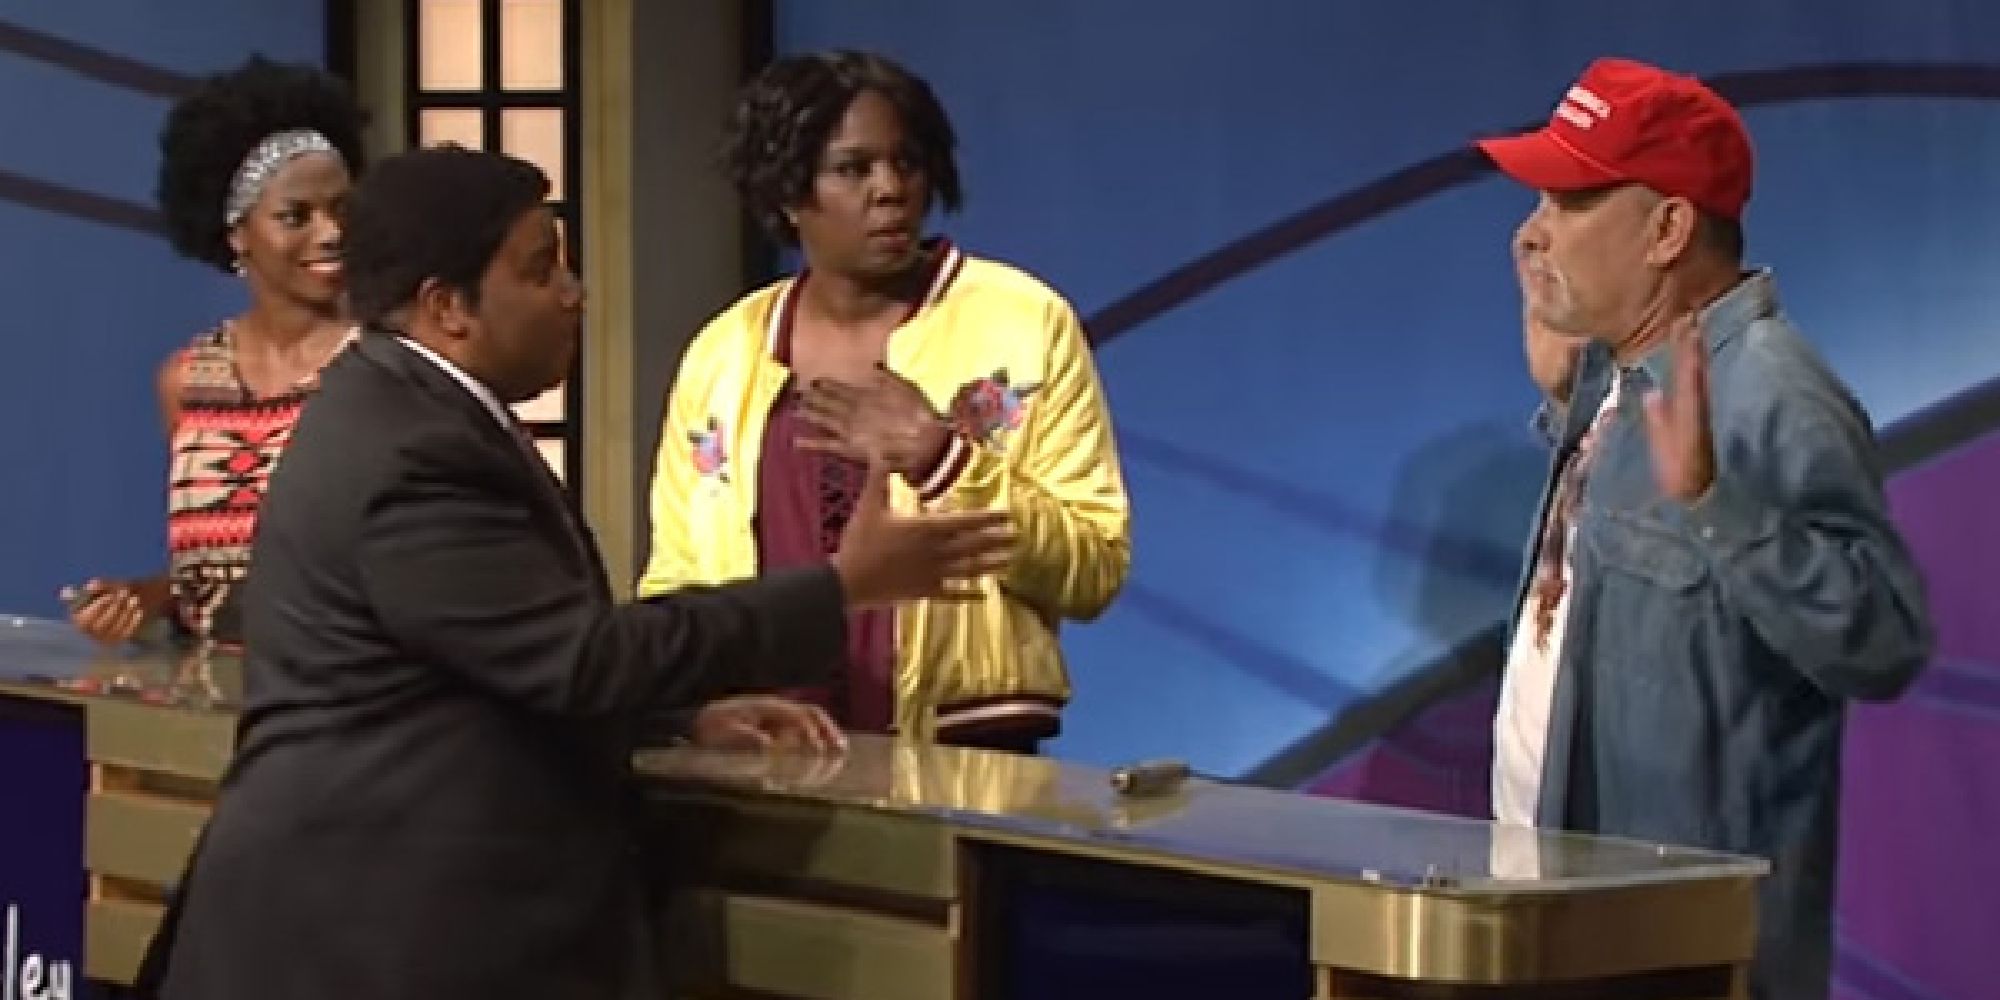 Kenan approaching a frightened Tom Hanks in Black Jeopardy with Sasheer Zamata and Leslie Jones